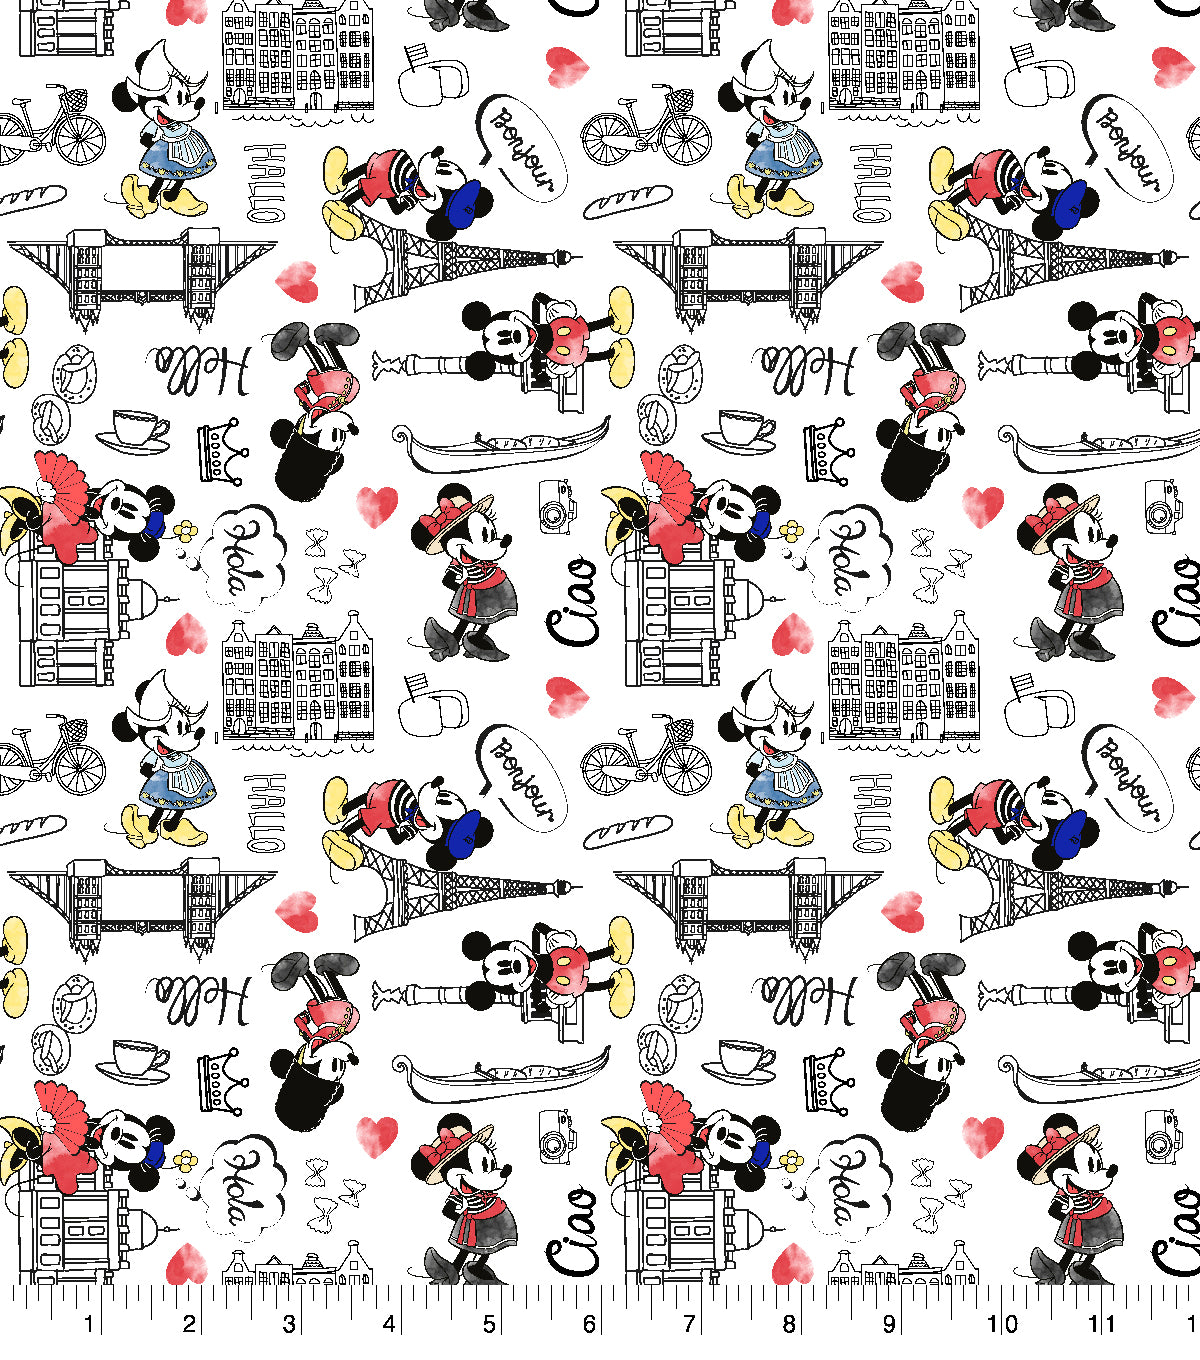 Mickey and Minnie, disney, love, mouse, HD wallpaper